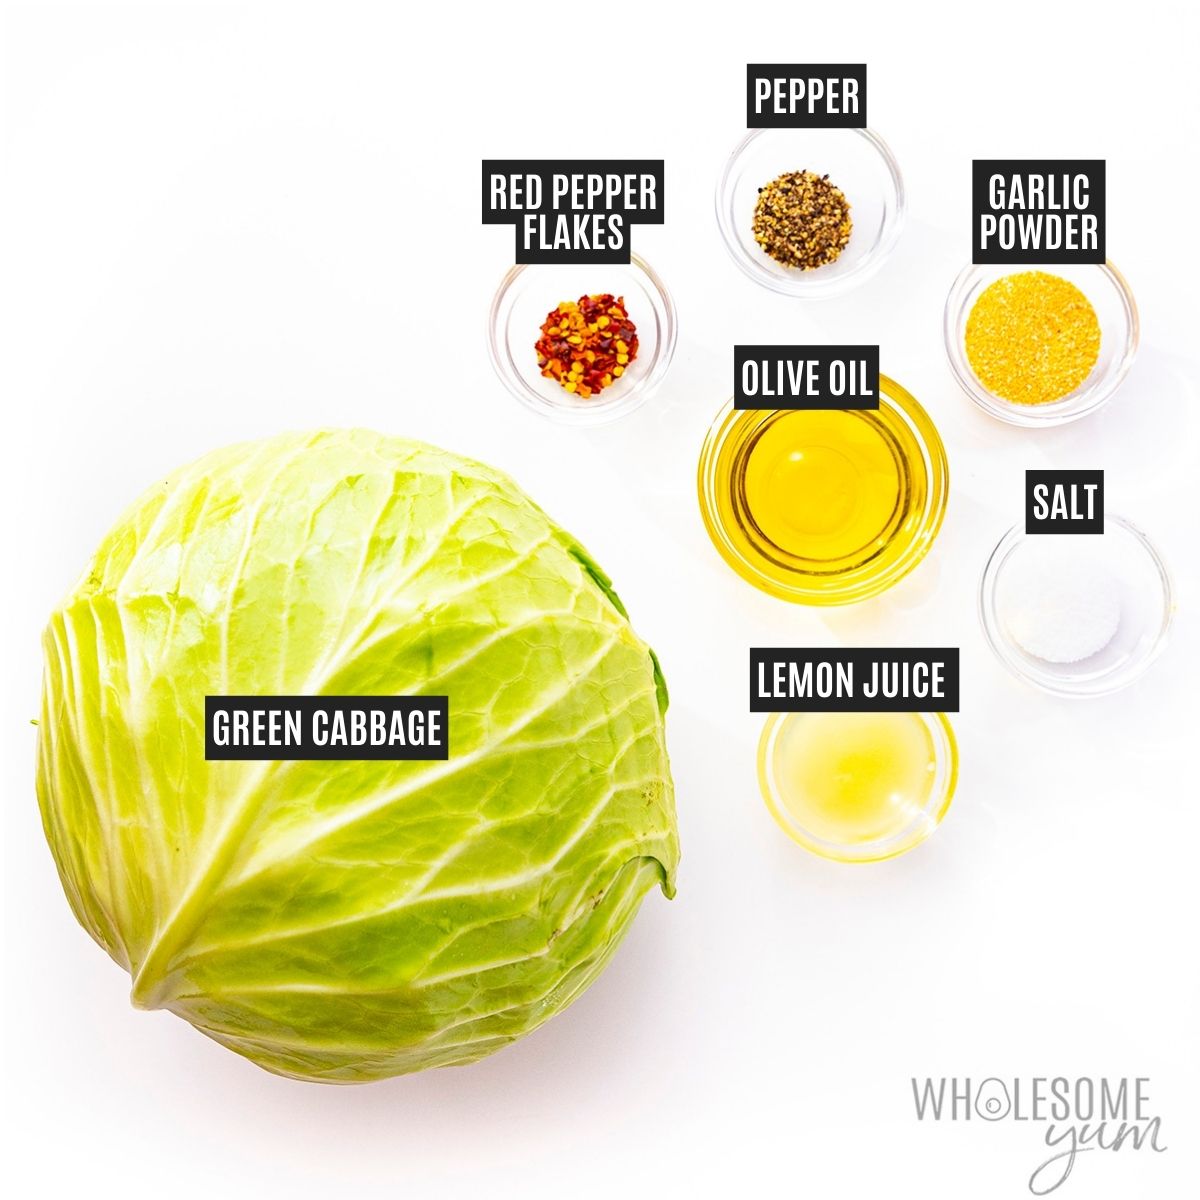 Roasted cabbage recipe ingredients.